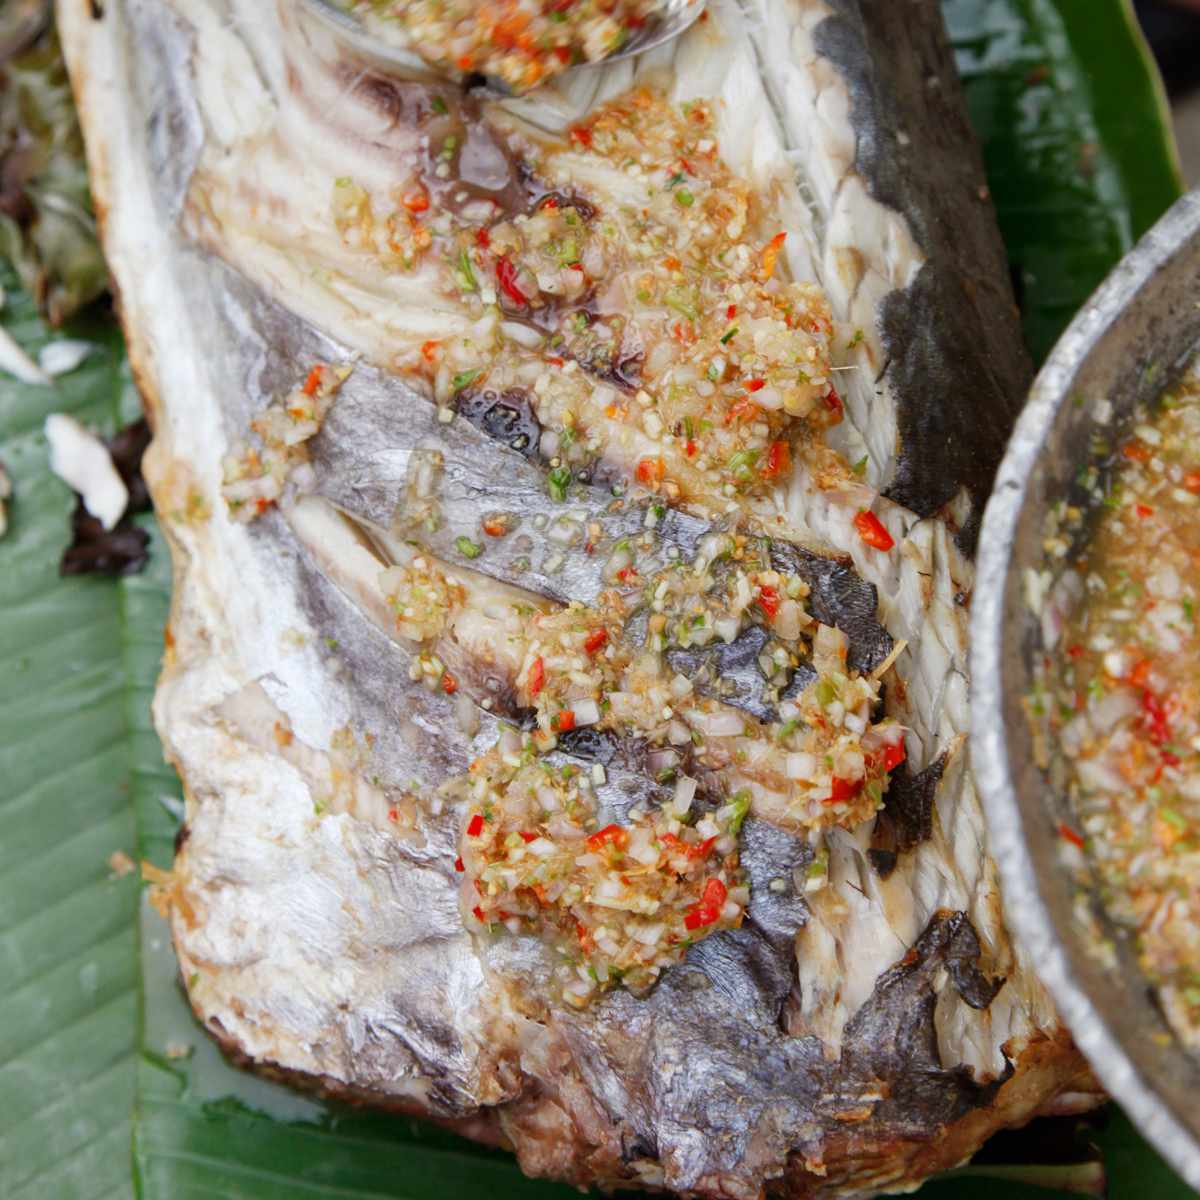 Fish Grilled in Banana Leaves with Chile-Lime Sauce